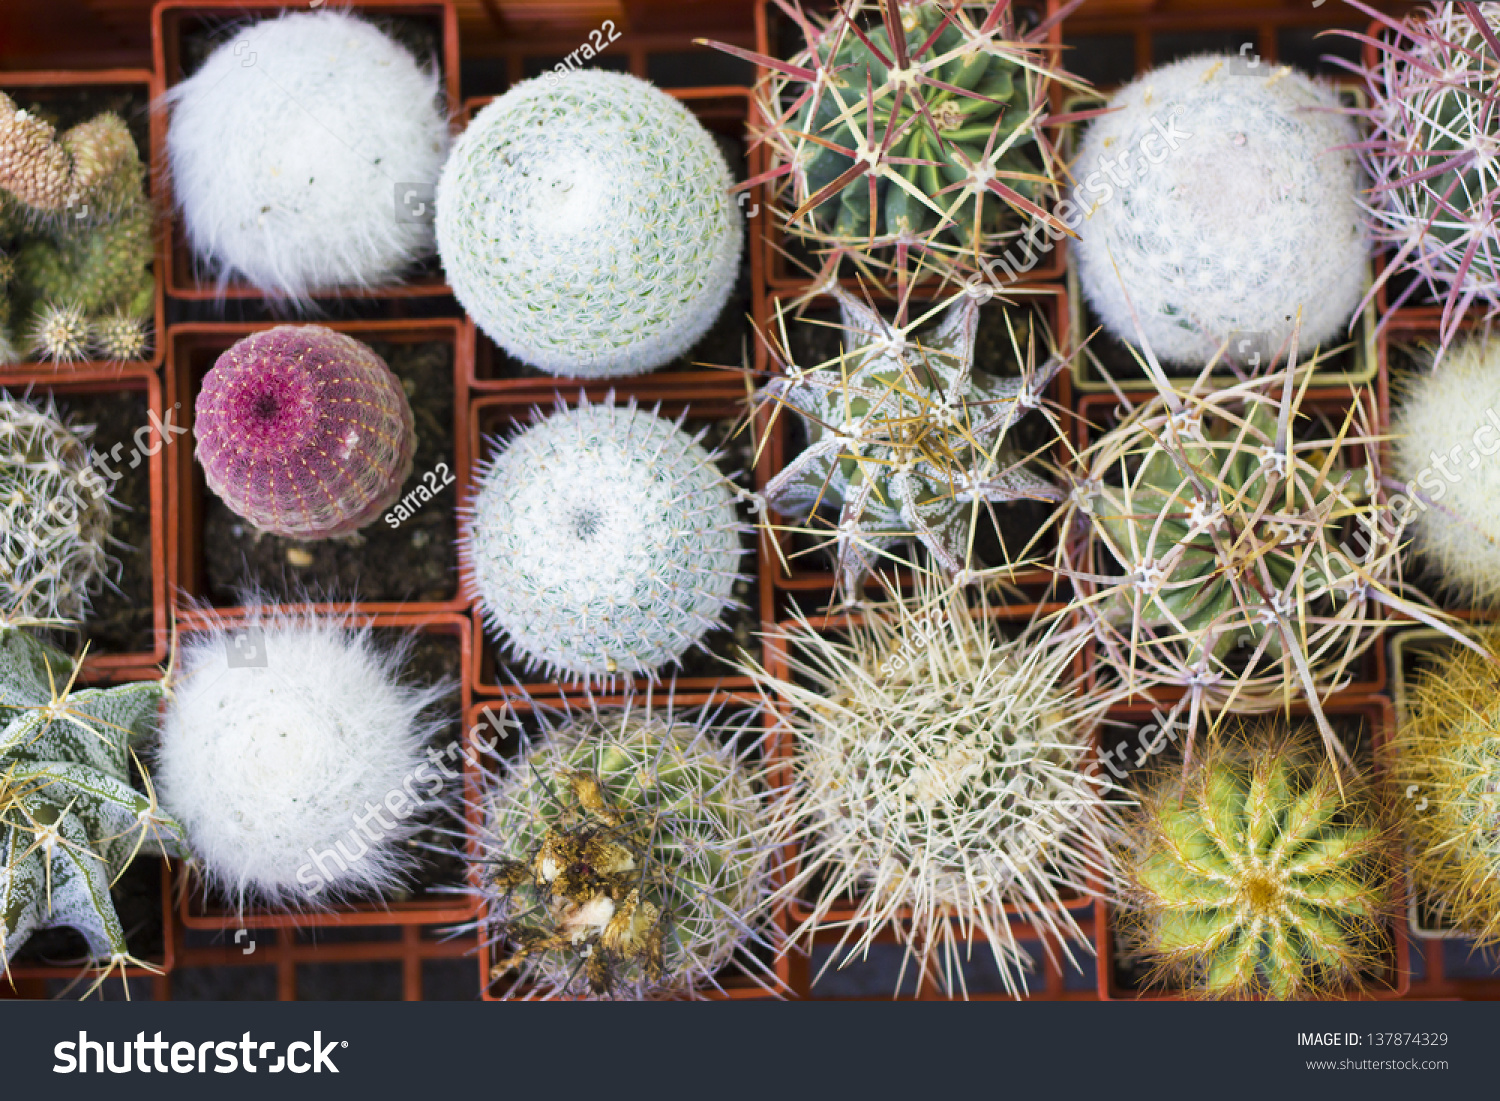 What are the different types of flowering cactus plants?